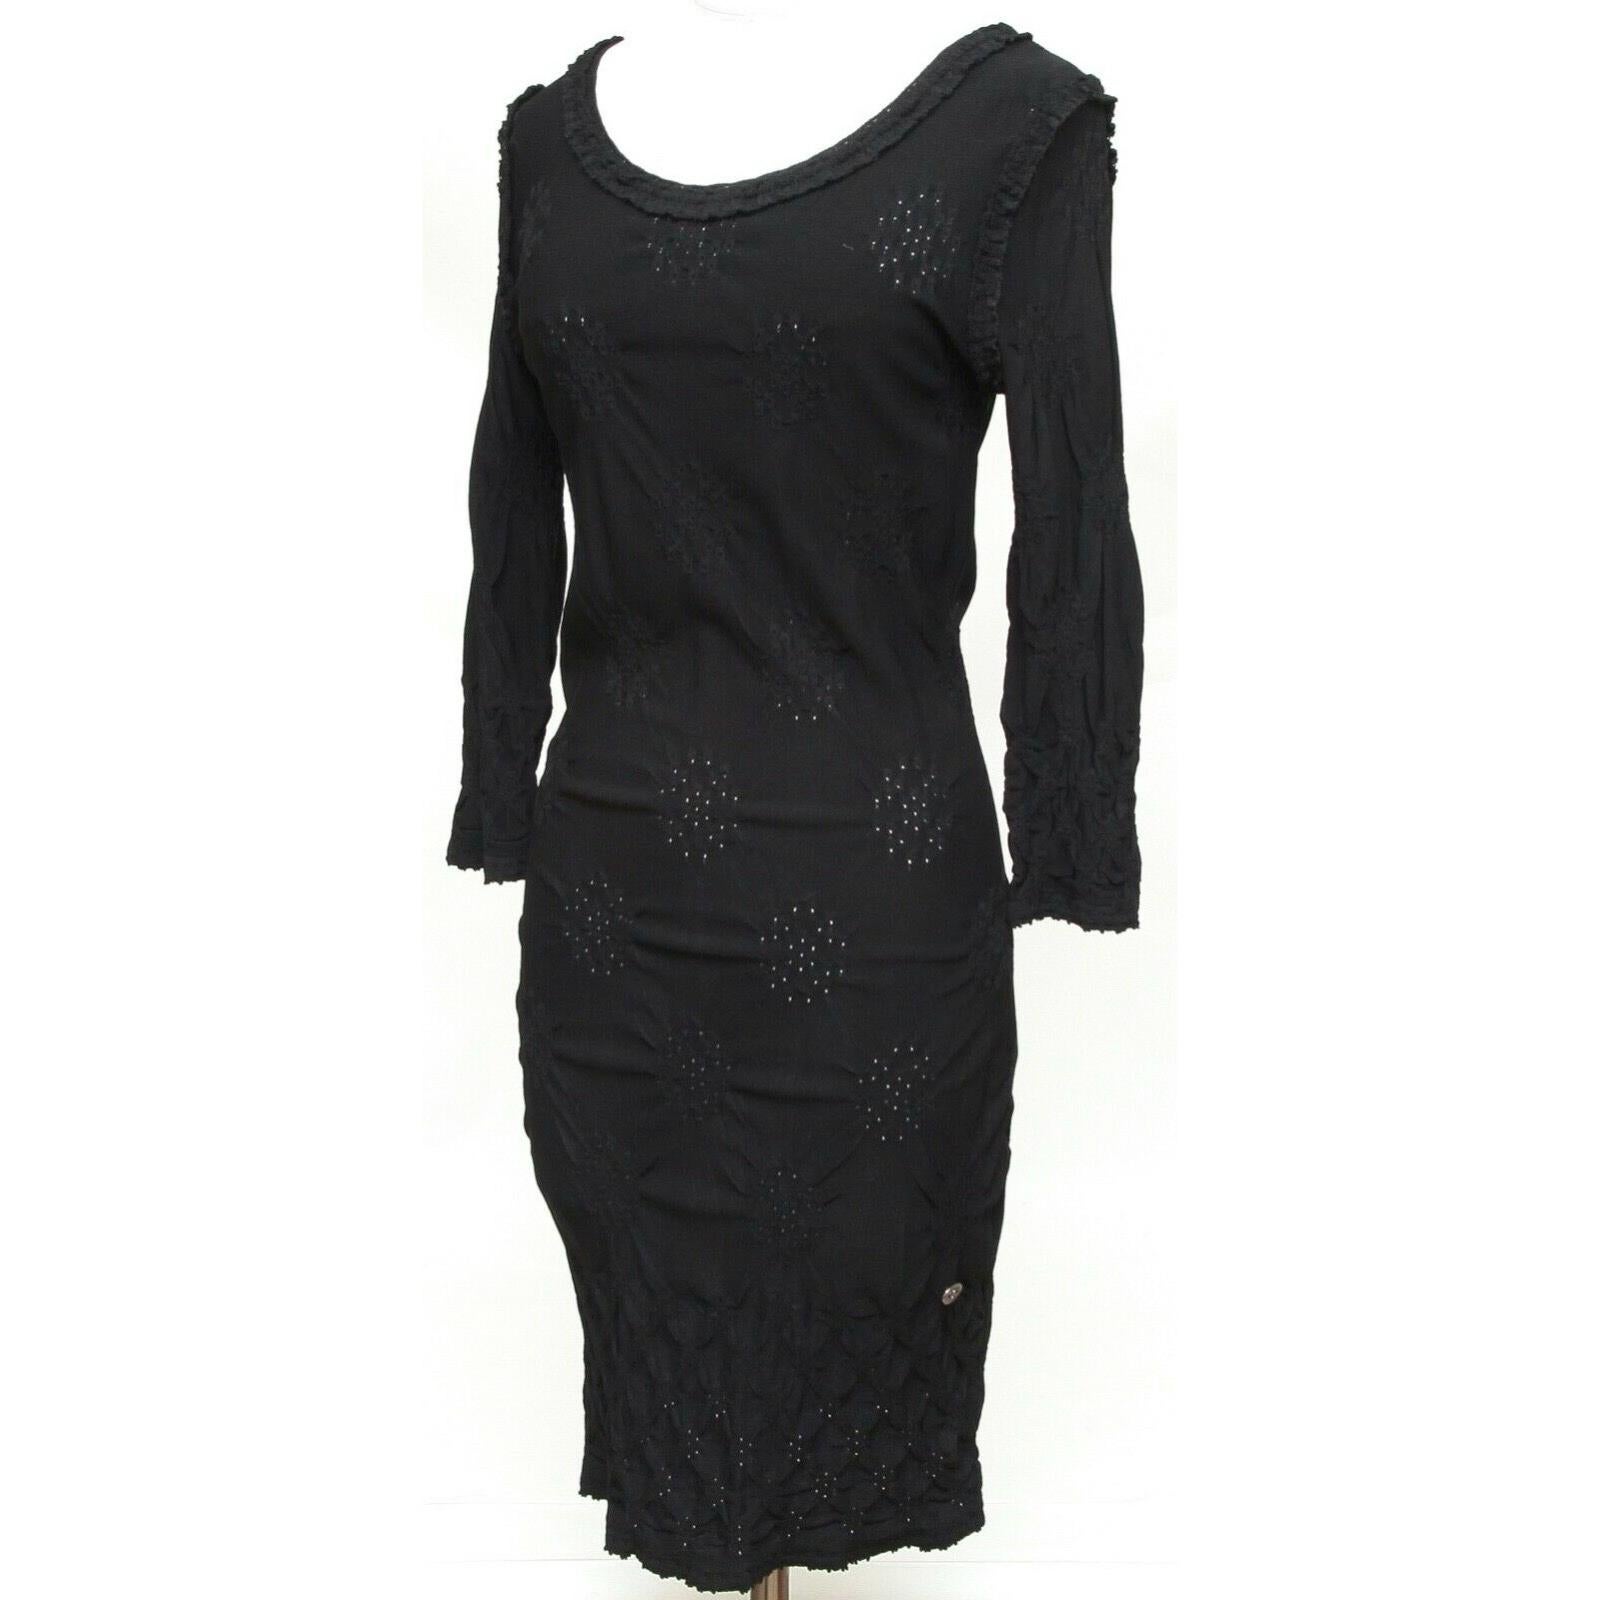 GUARANTEED AUTHENTIC CHANEL CRUISE 2011 BLACK POINTELLE KNIT DRESS

Design:
- Viscose blend pointelle knit long sleeve dress.
- Scoop neck.
- Silver-tone CC metal plaque at lower left hem.
- Unlined.

Material: 75% Viscose, 25% Polyamide

Size: